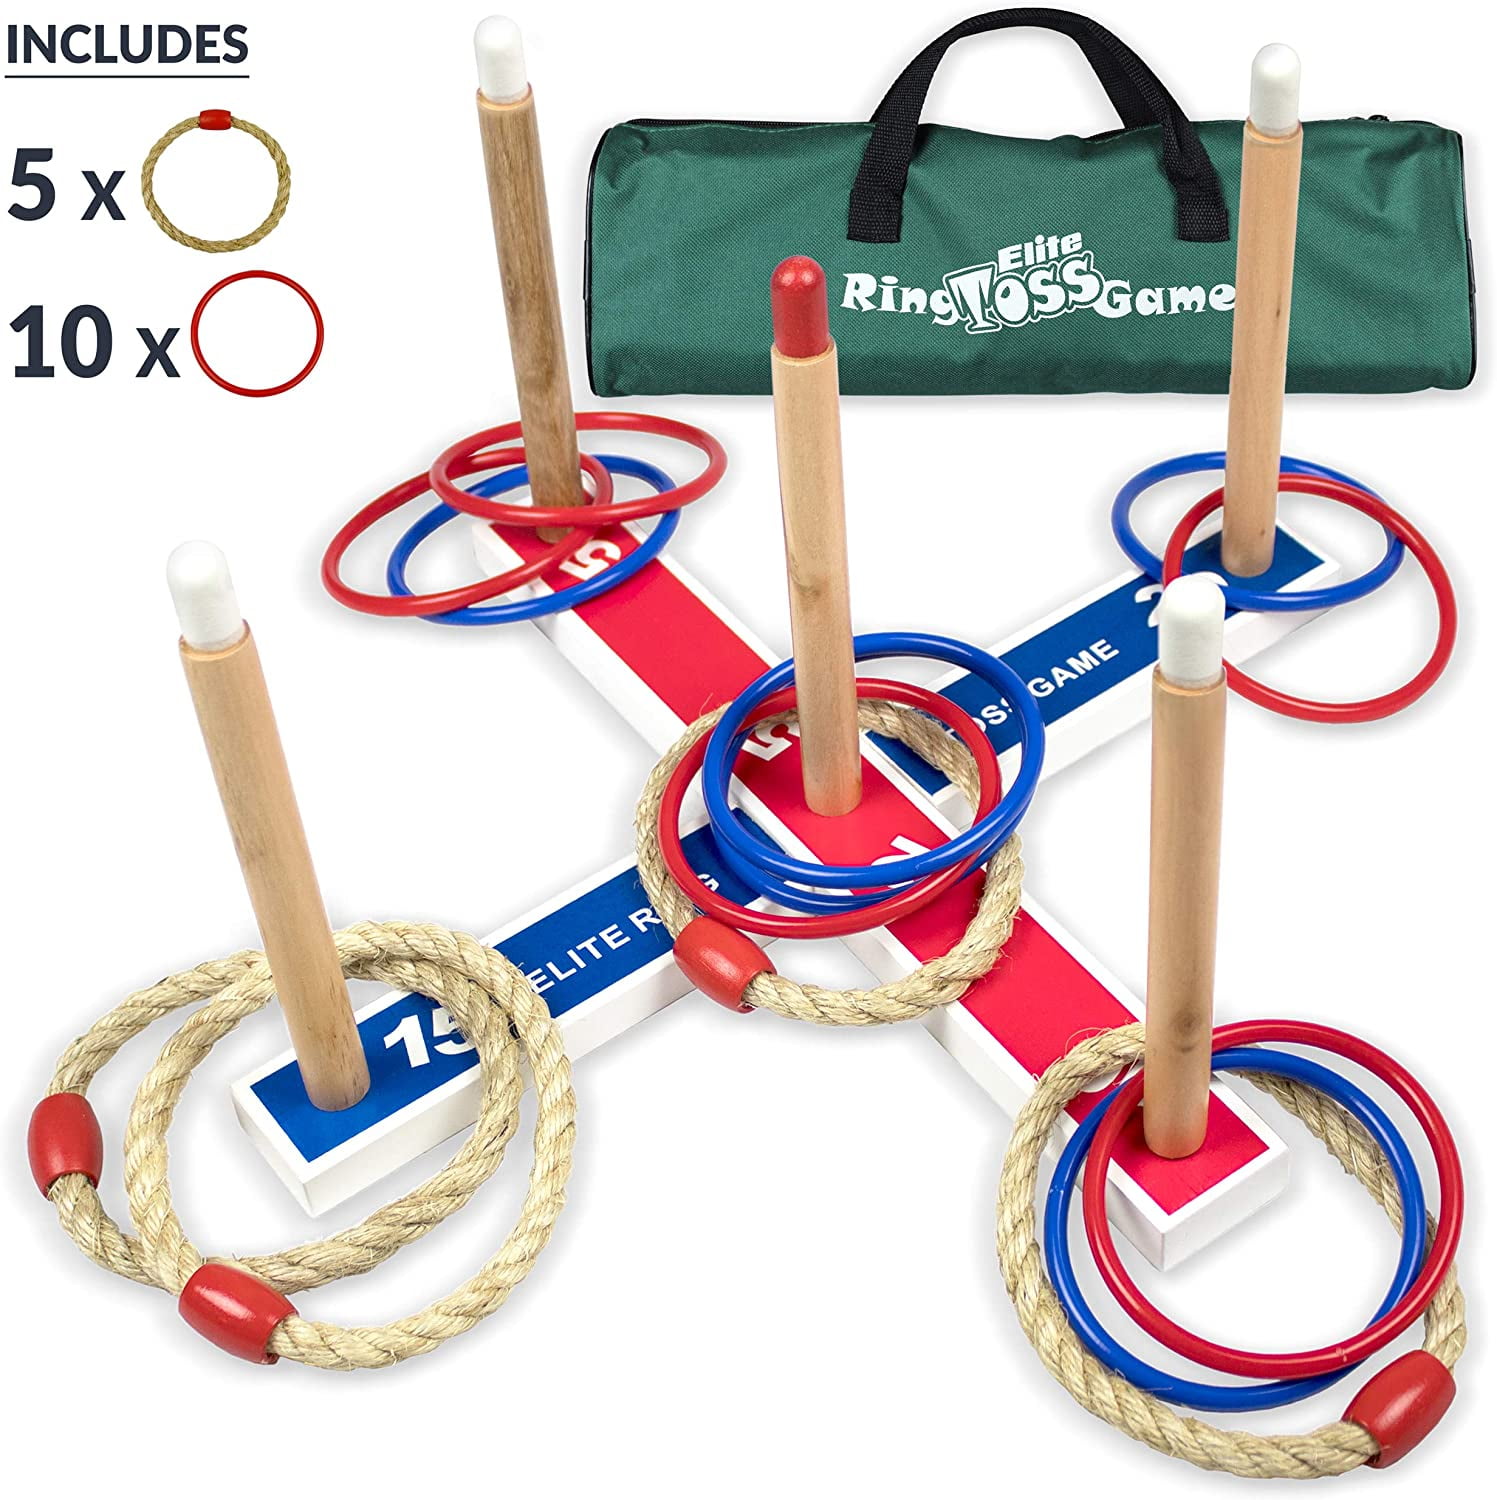 Gold Toy Outdoor Games For Kids - Ring Toss Yard Games for Adults and Family. Easy Backyard Games to Assemble, With Compact Carry Bag for Easy Storage. Fun Kids Games or Outdoor Toys for Kids